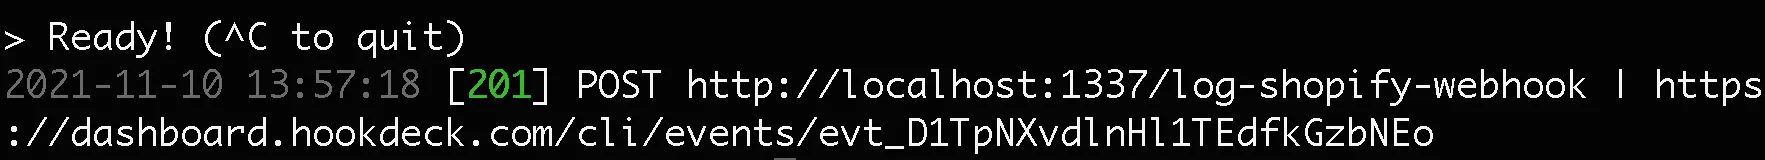 Successfully receive shopify webhook in local server with Hookdeck CLI